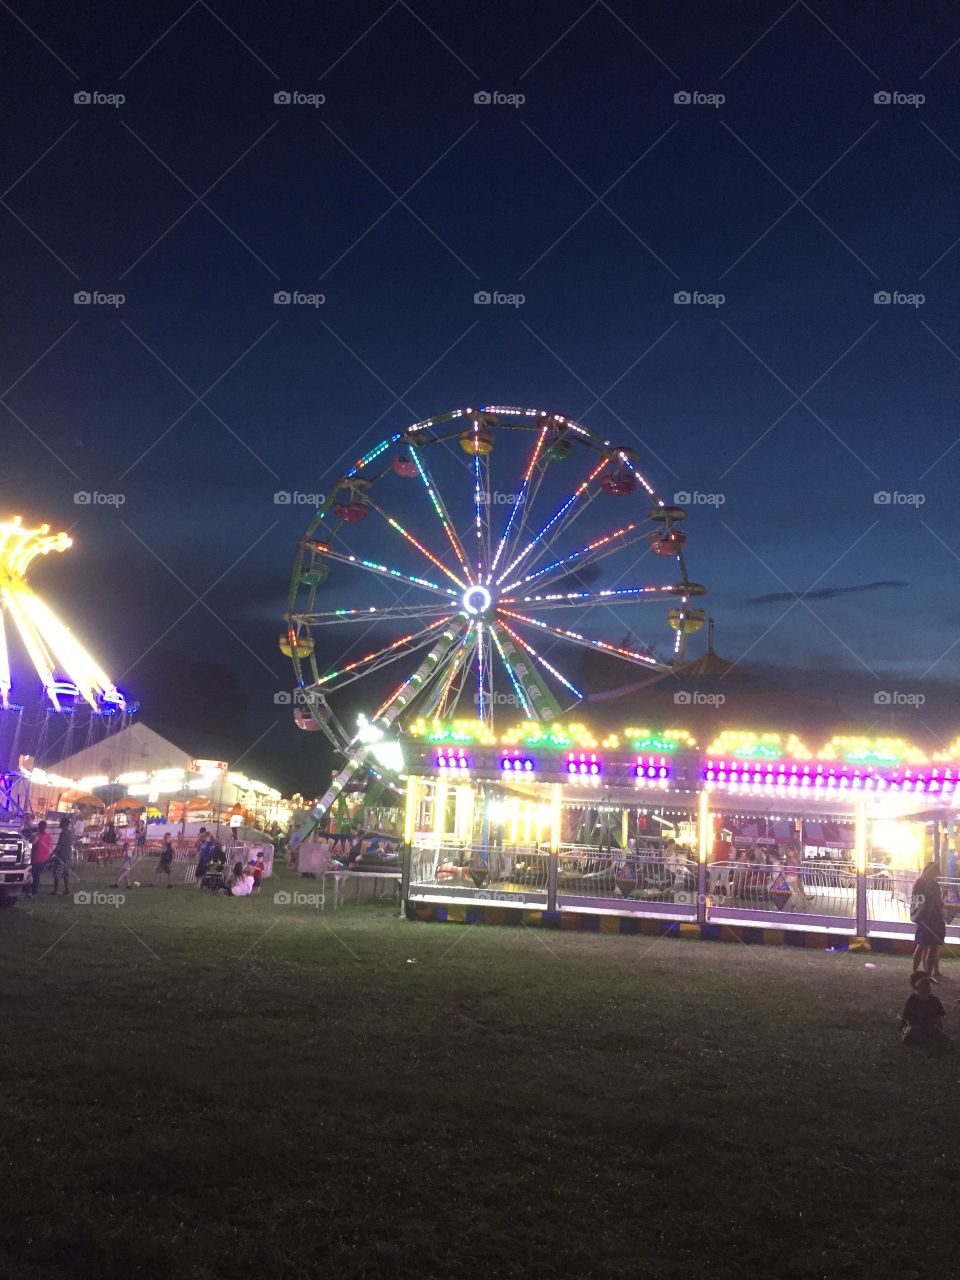 Rides at the Canfield fair 